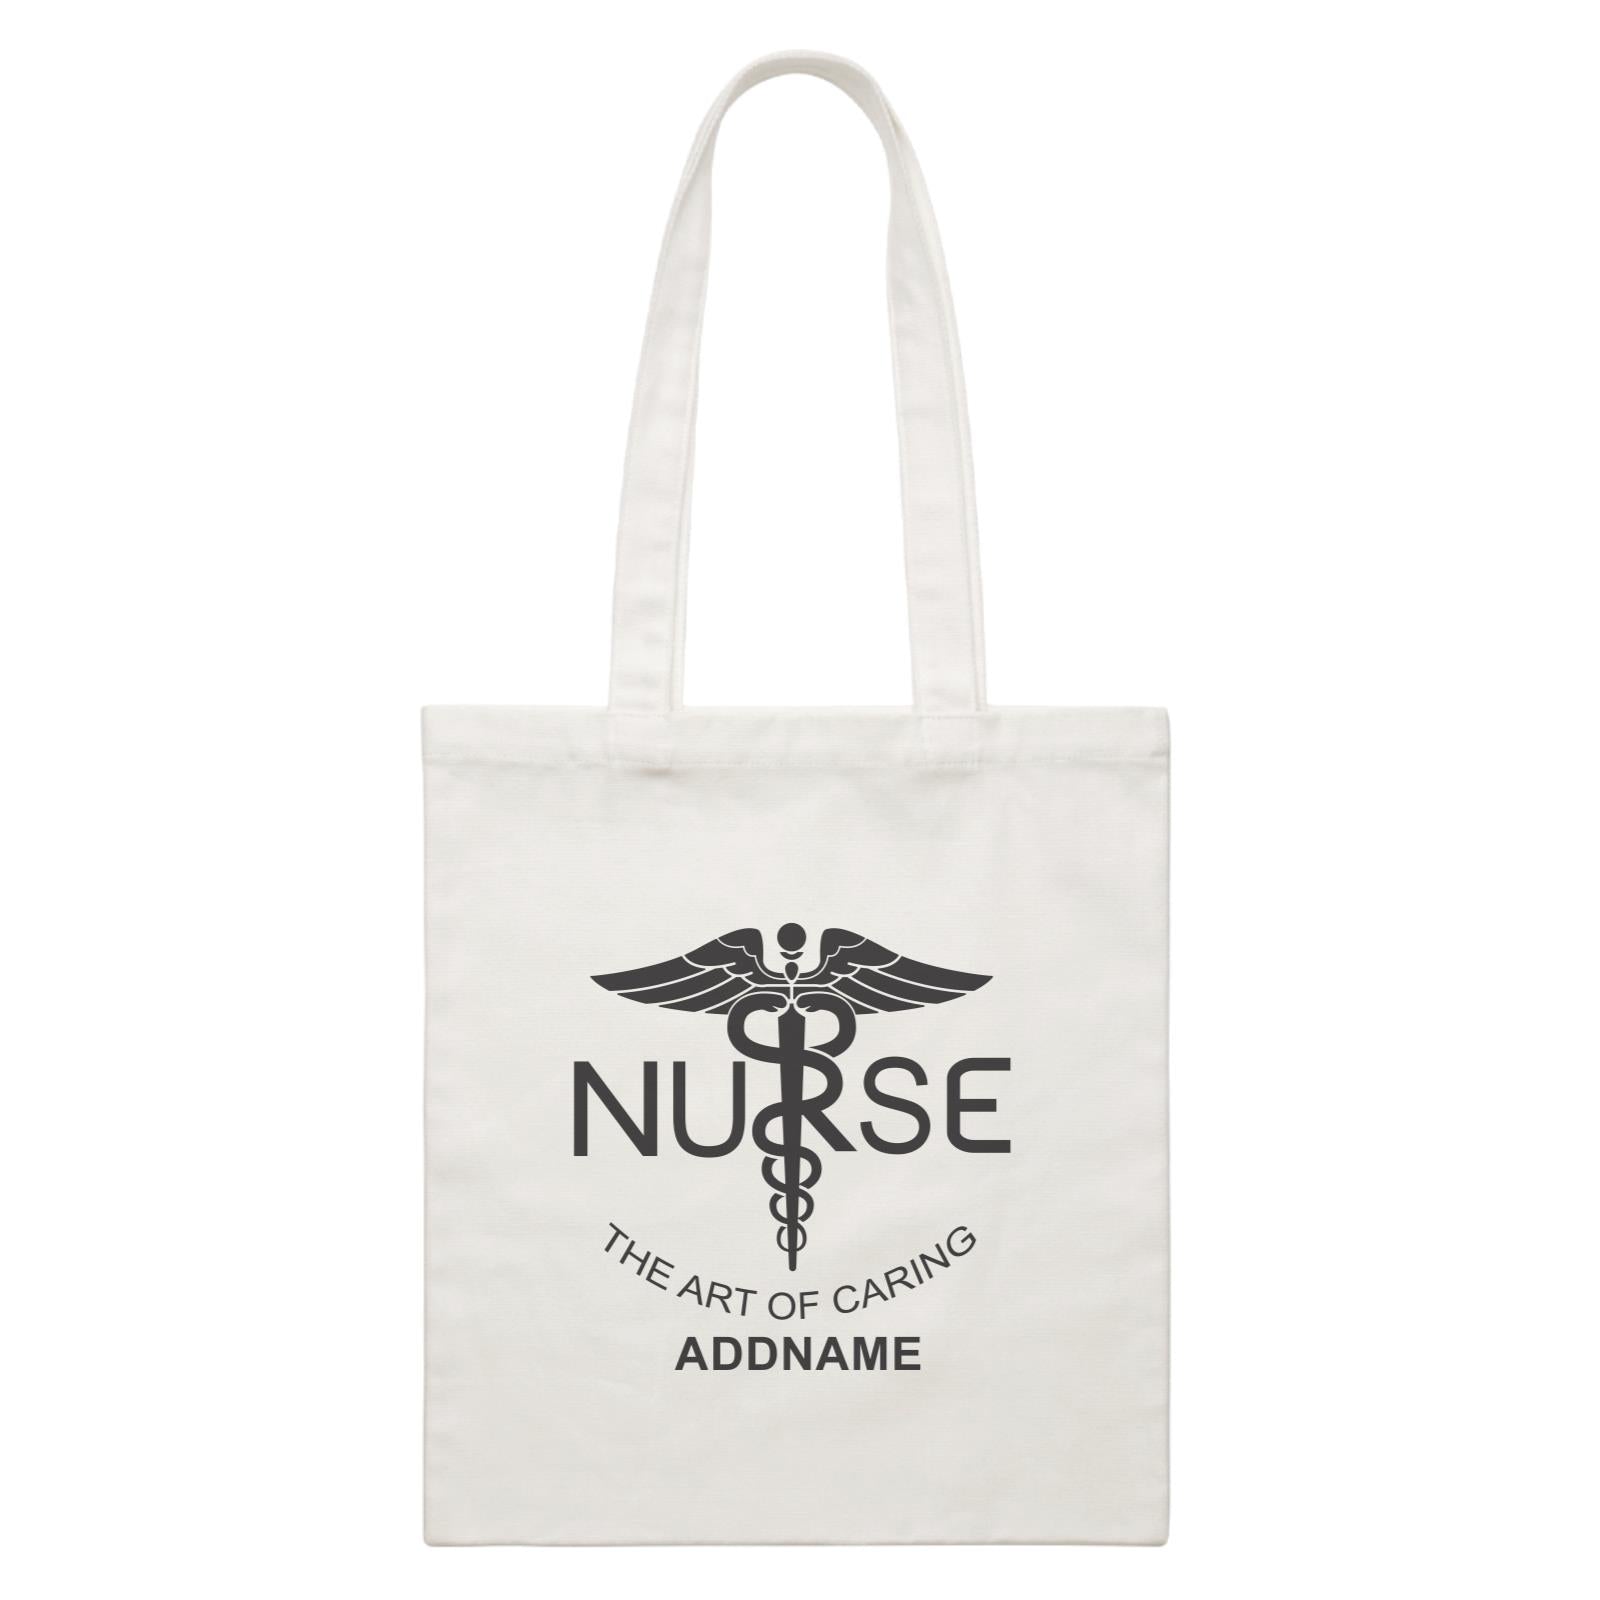 Nurse Quotes The Art Of Caring Addname White Canvas Bag